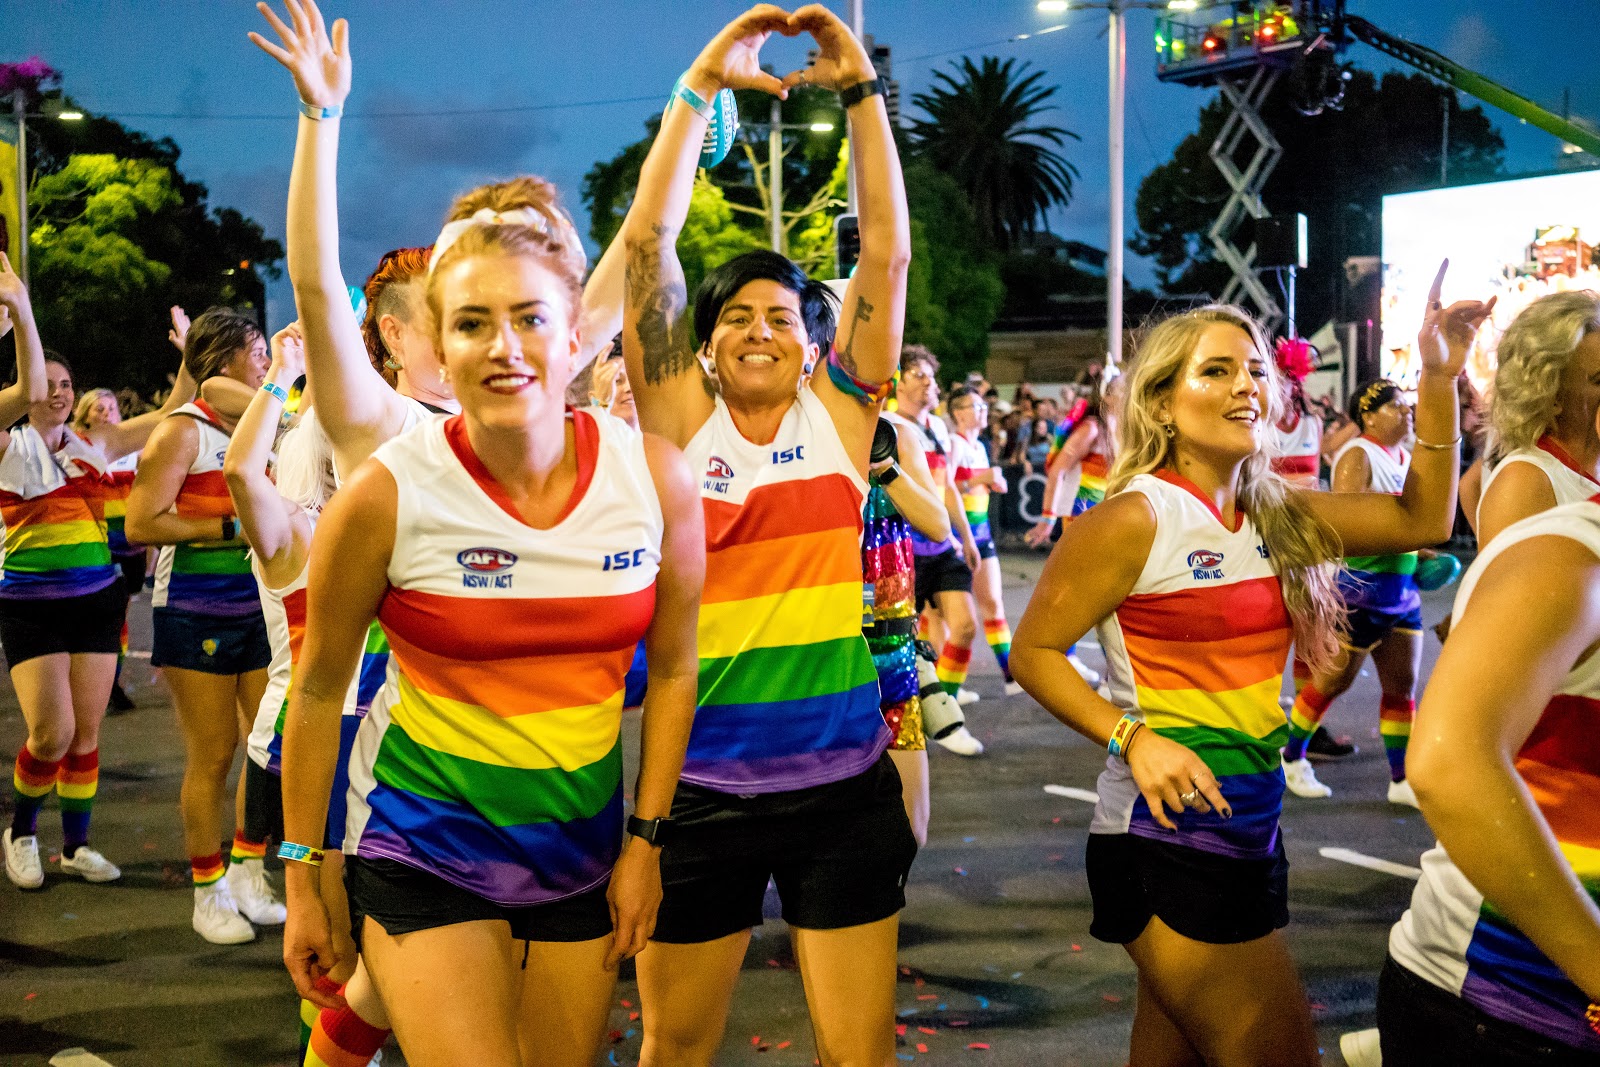 Photo of Mardi Gras parade attendees in colourful AFL uniform